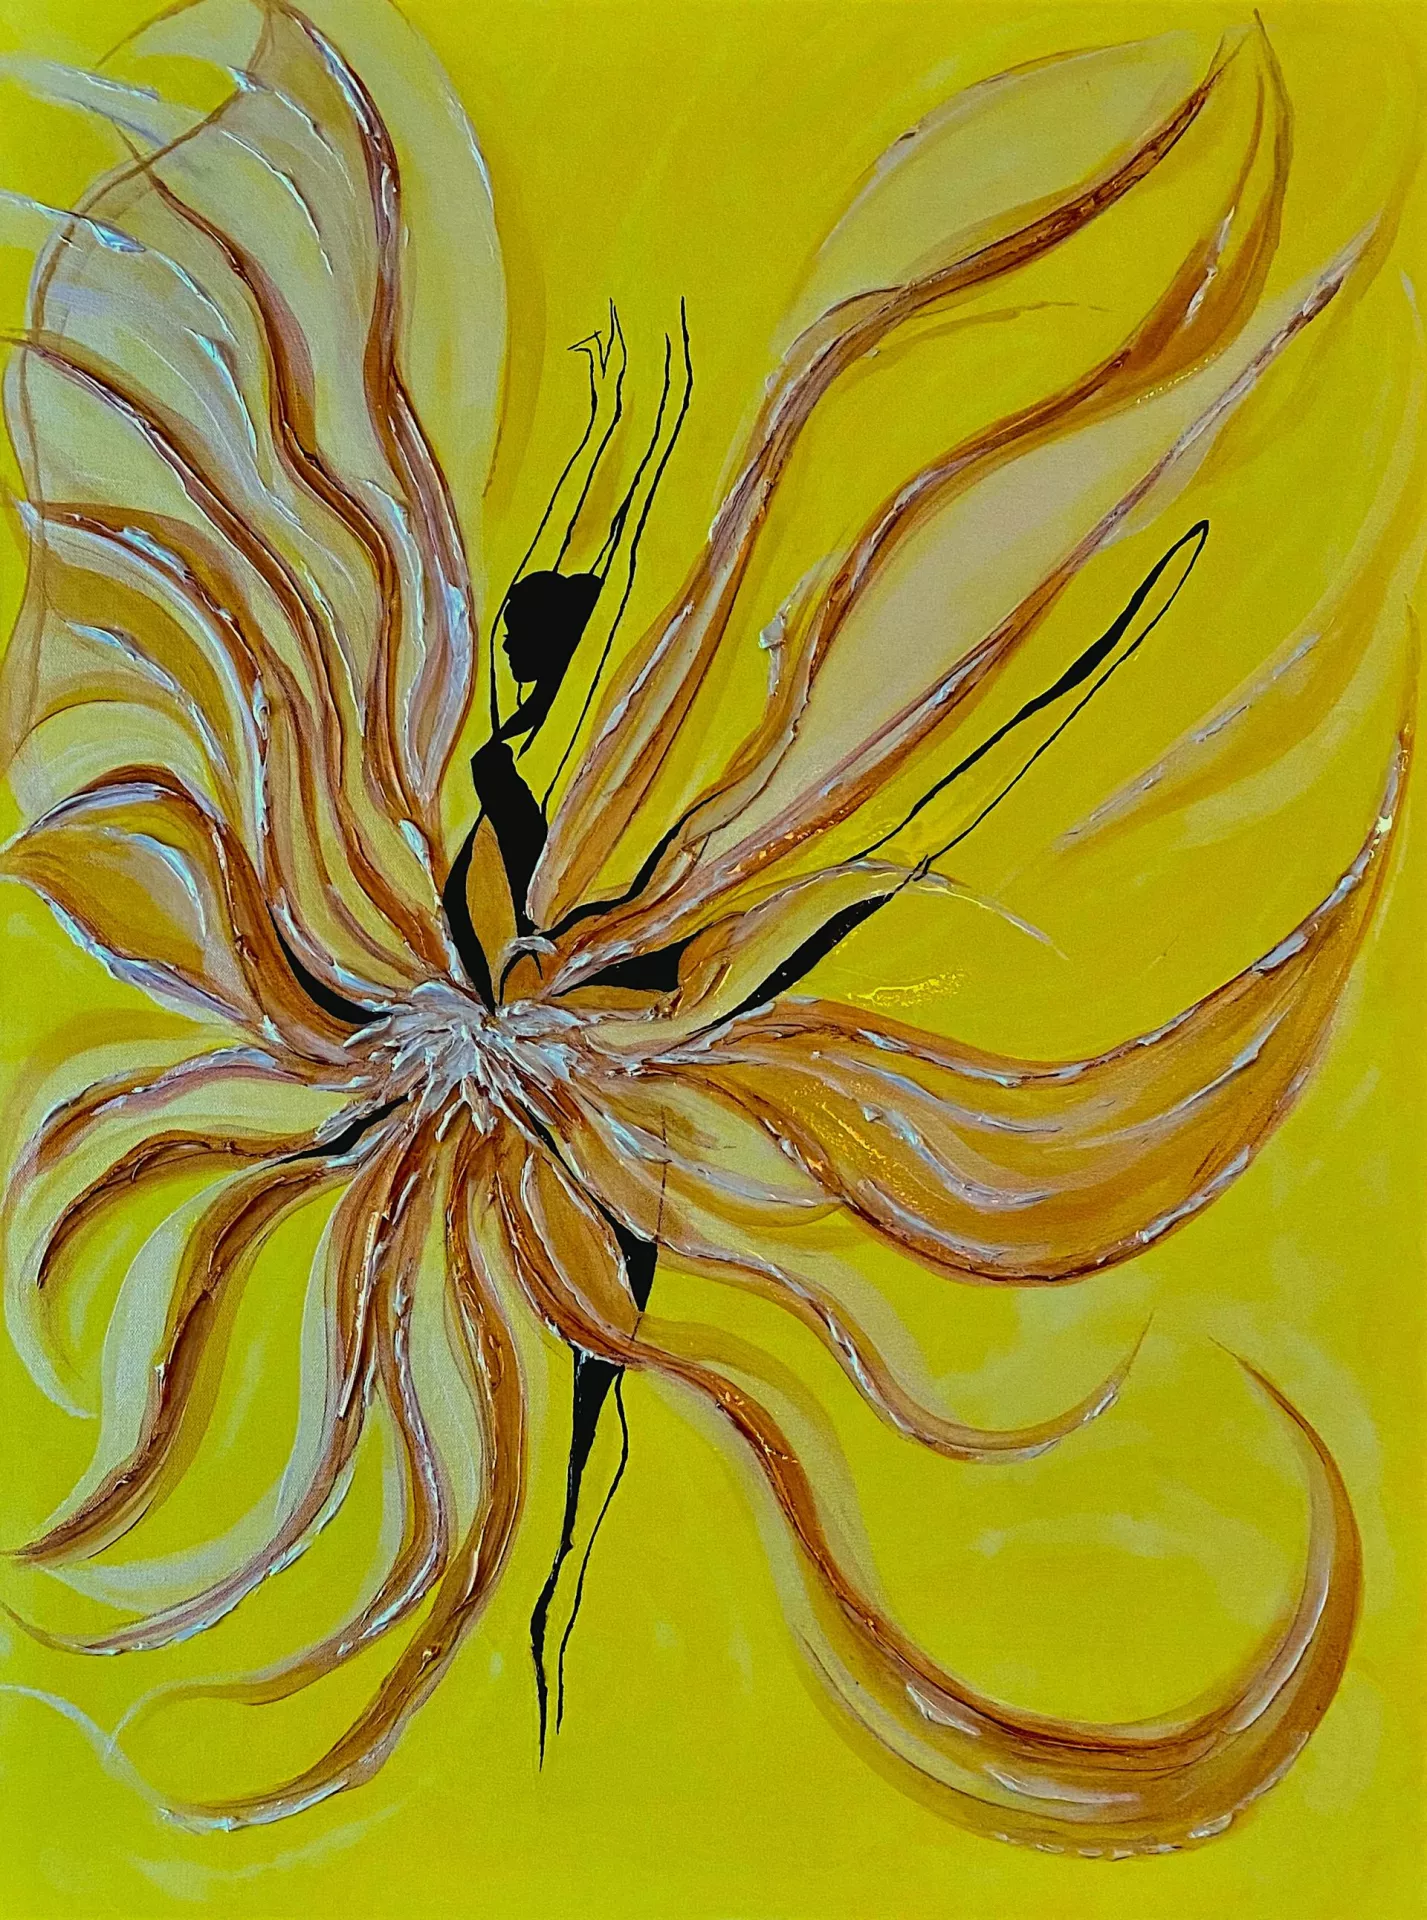 On a saturated lemon yellow background the black-lined figure of a dancer leaps across the canvas with her arms raised high. The long petals pieces of her skirt fly around her floating and curling into every corner.